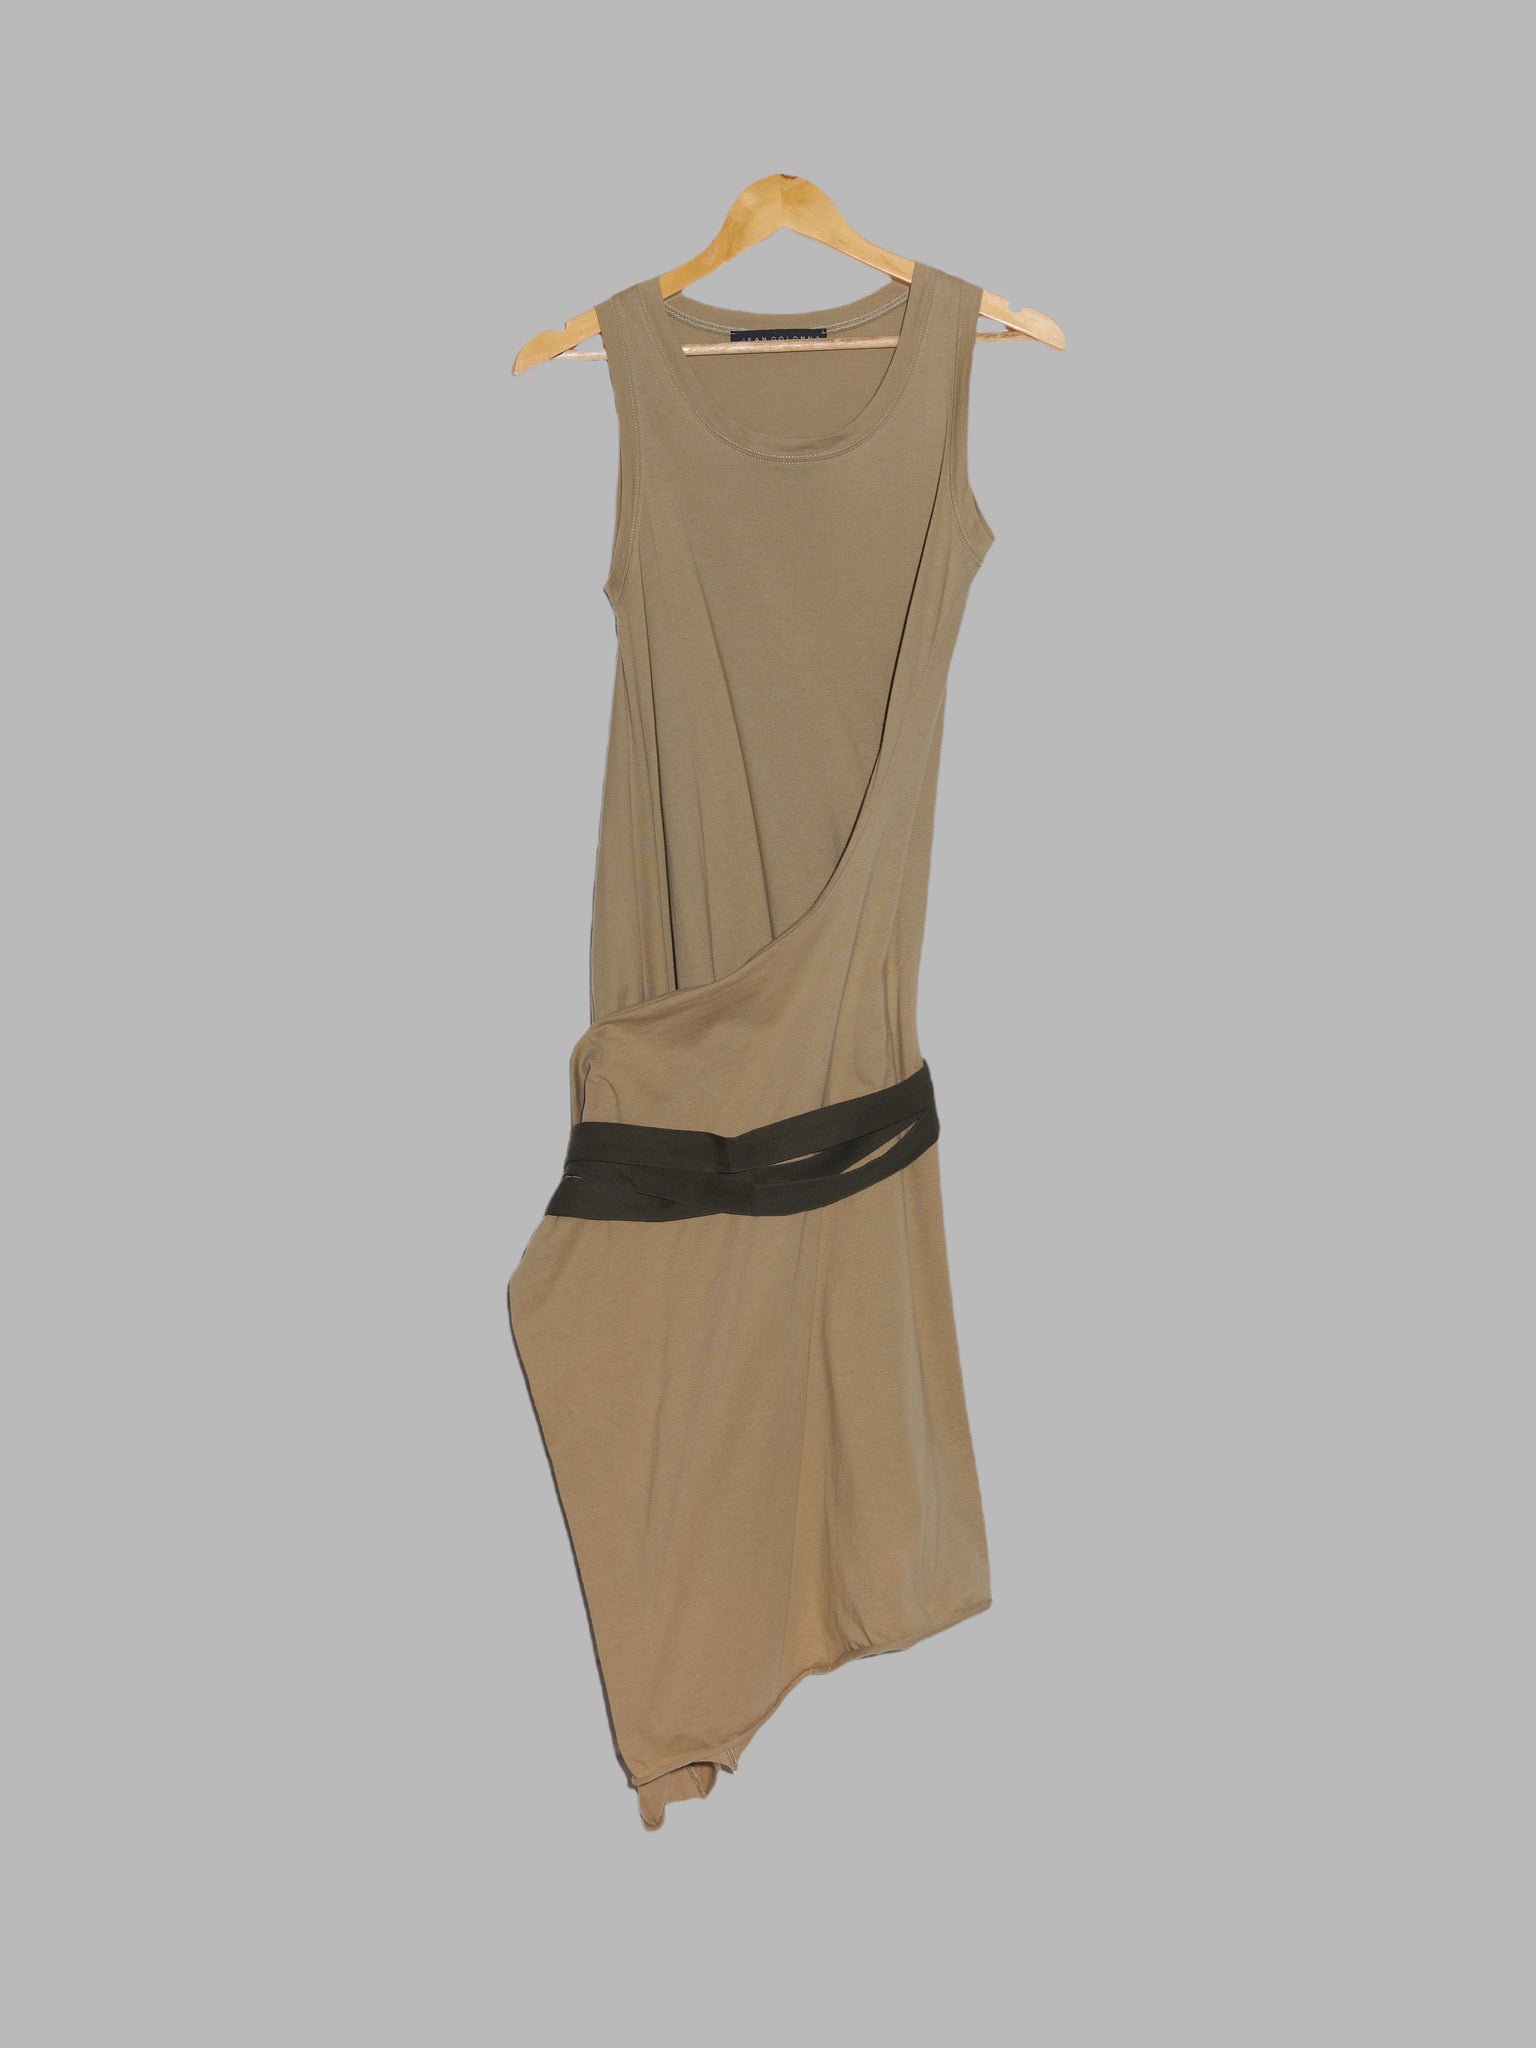 Jean Colonna sand-y cotton sleeveless dress with belted rectangular panel - size 40